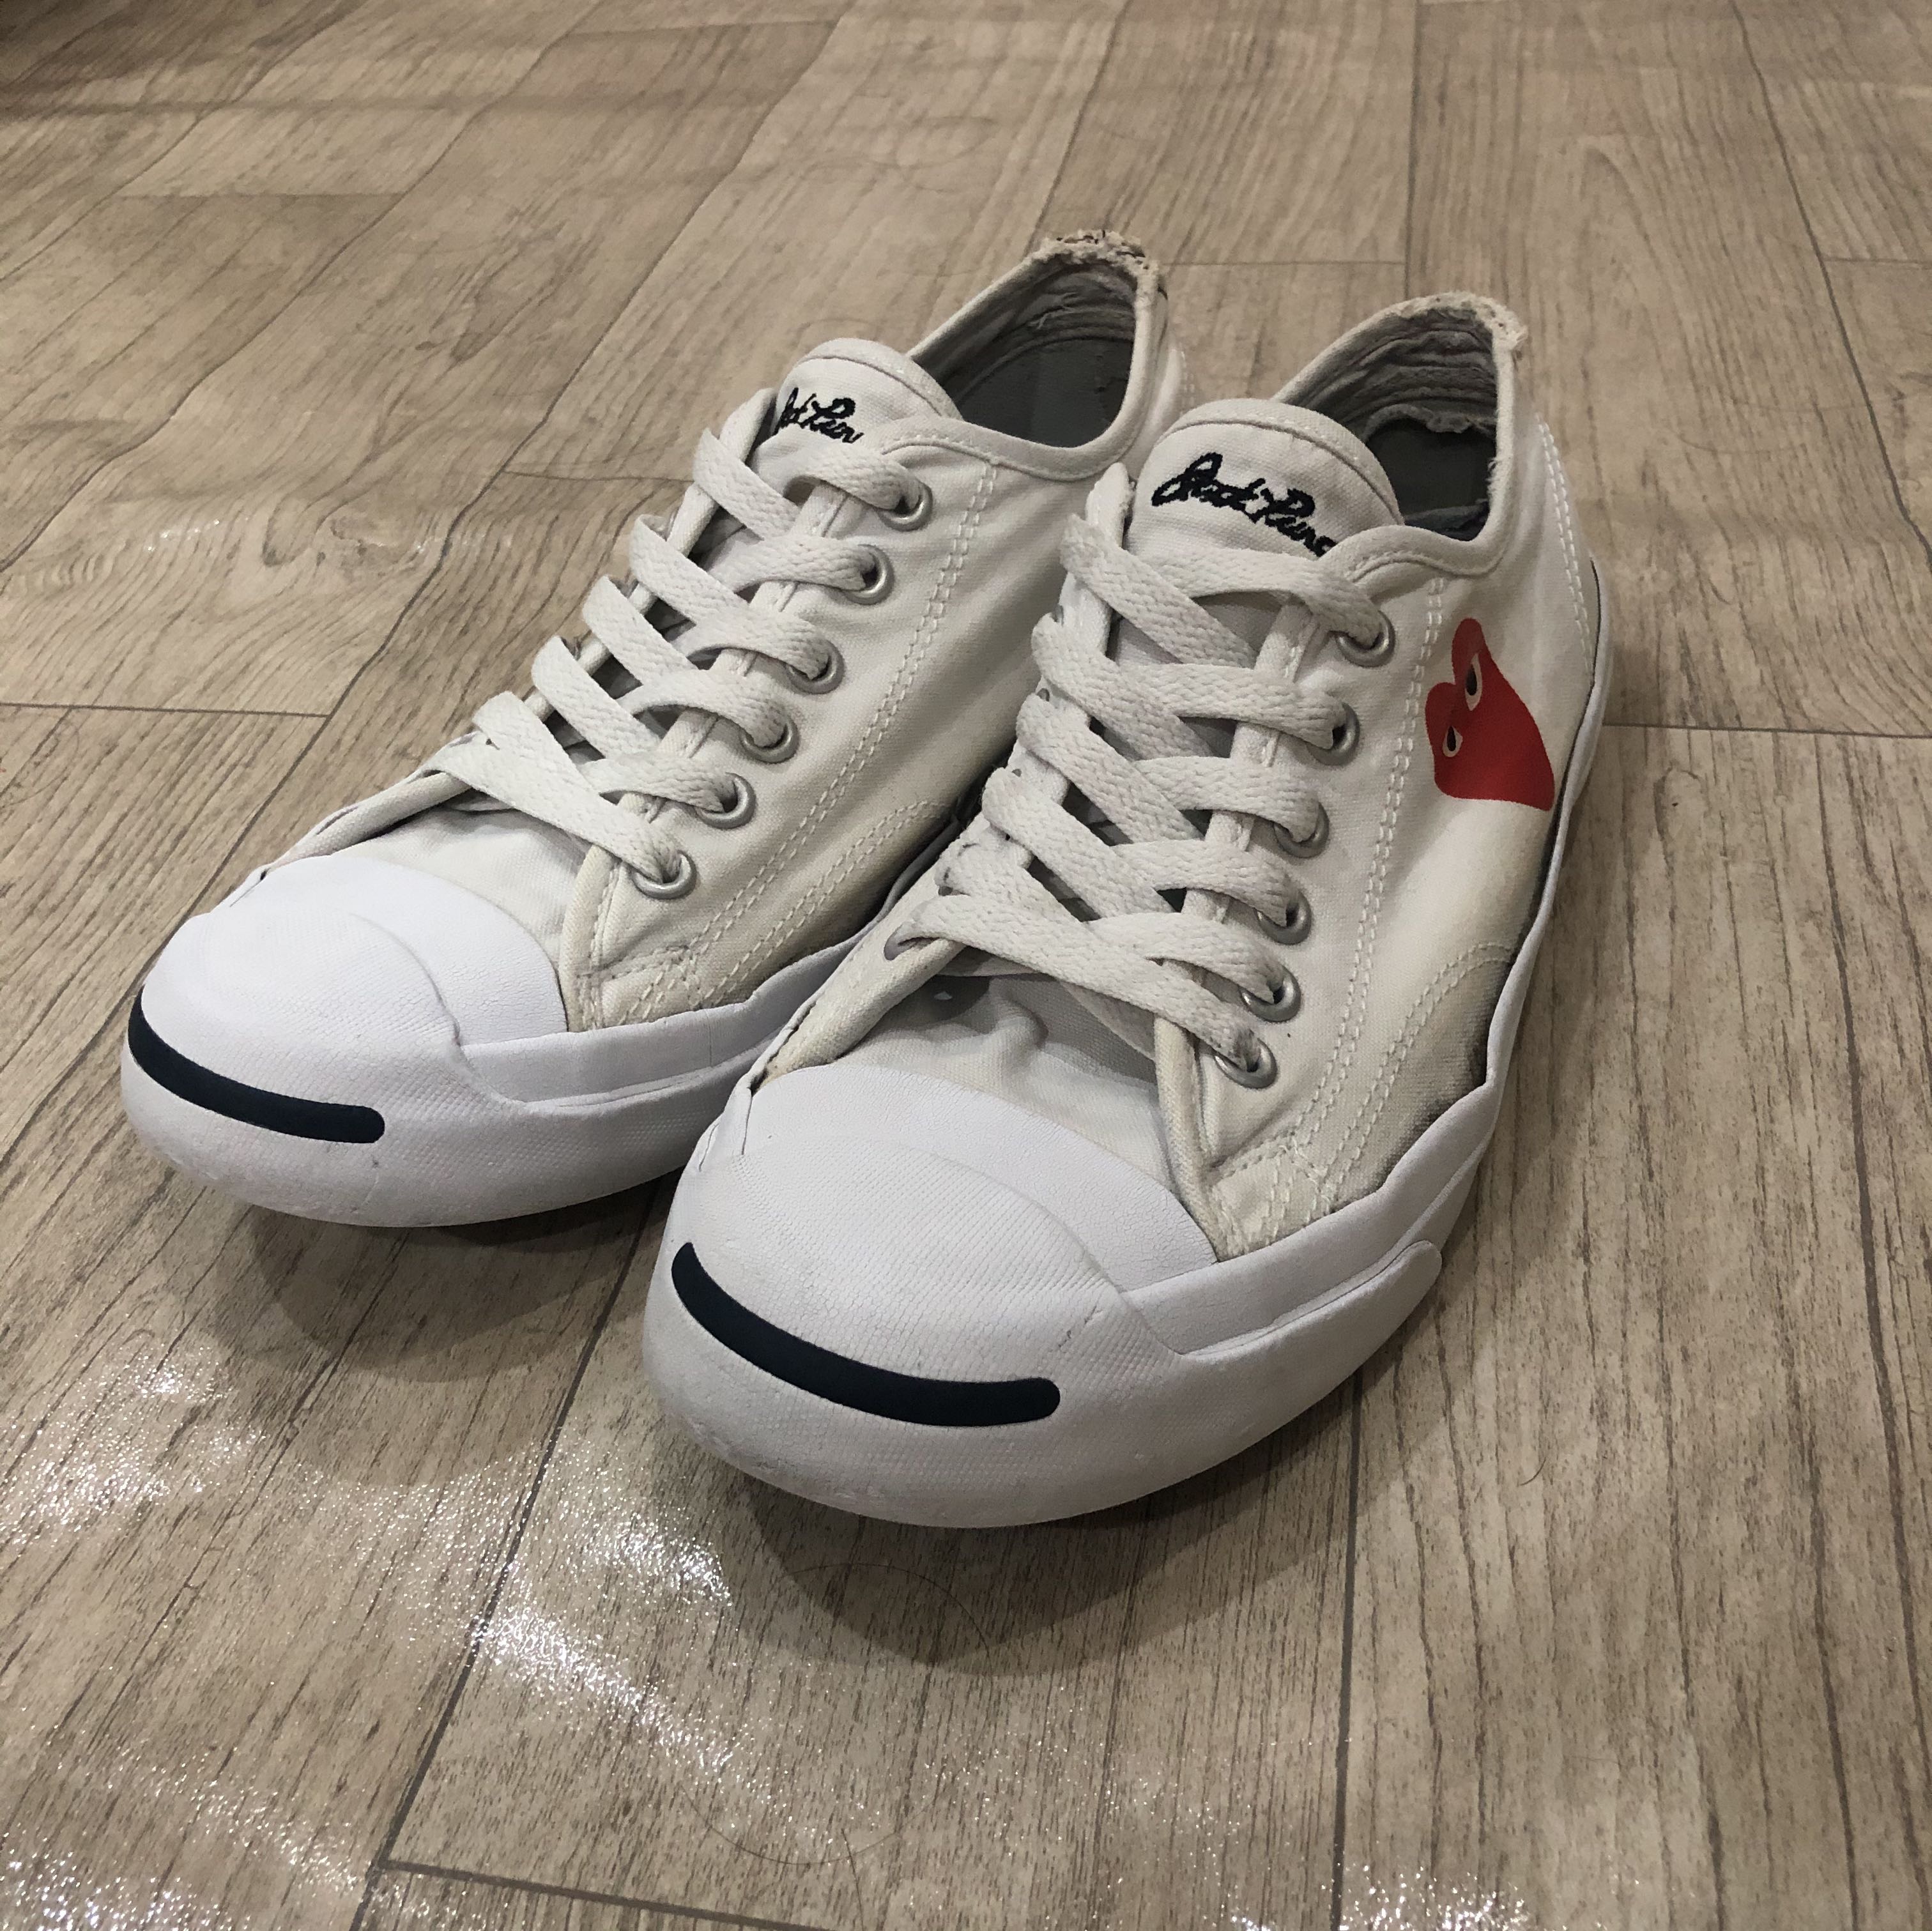 Converse Jack Purcell x CDG, Men's 